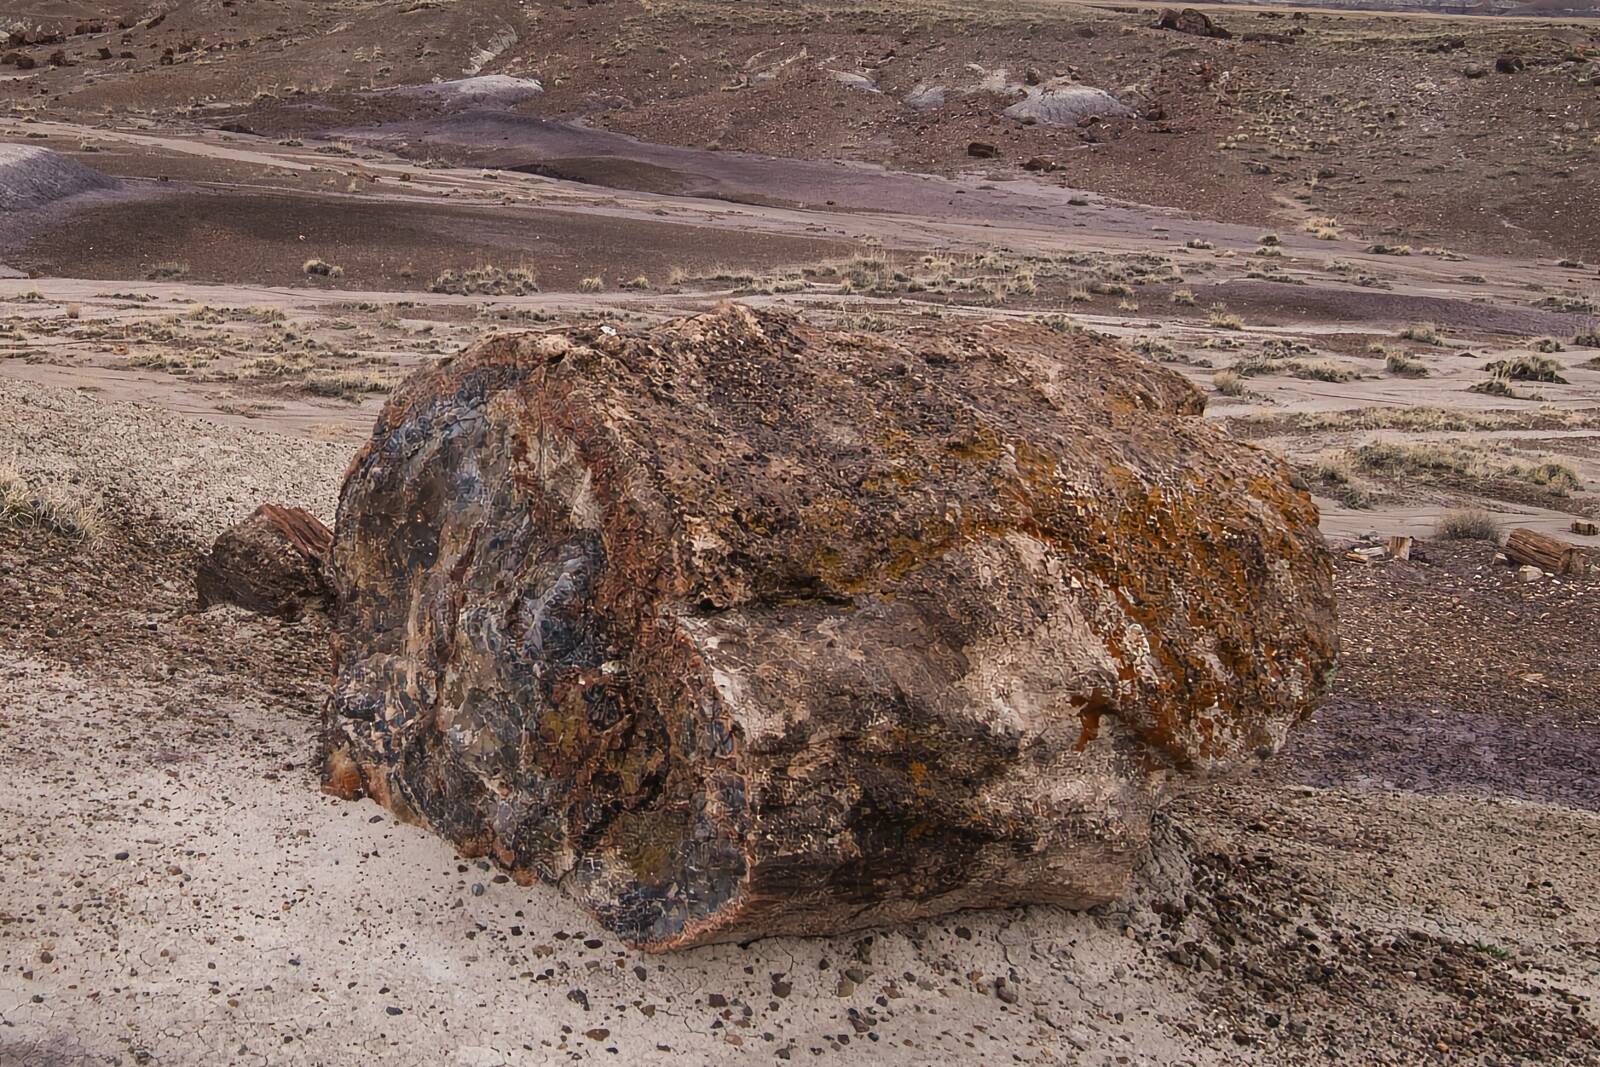 Image of Petrified Forest National Park by Steve West